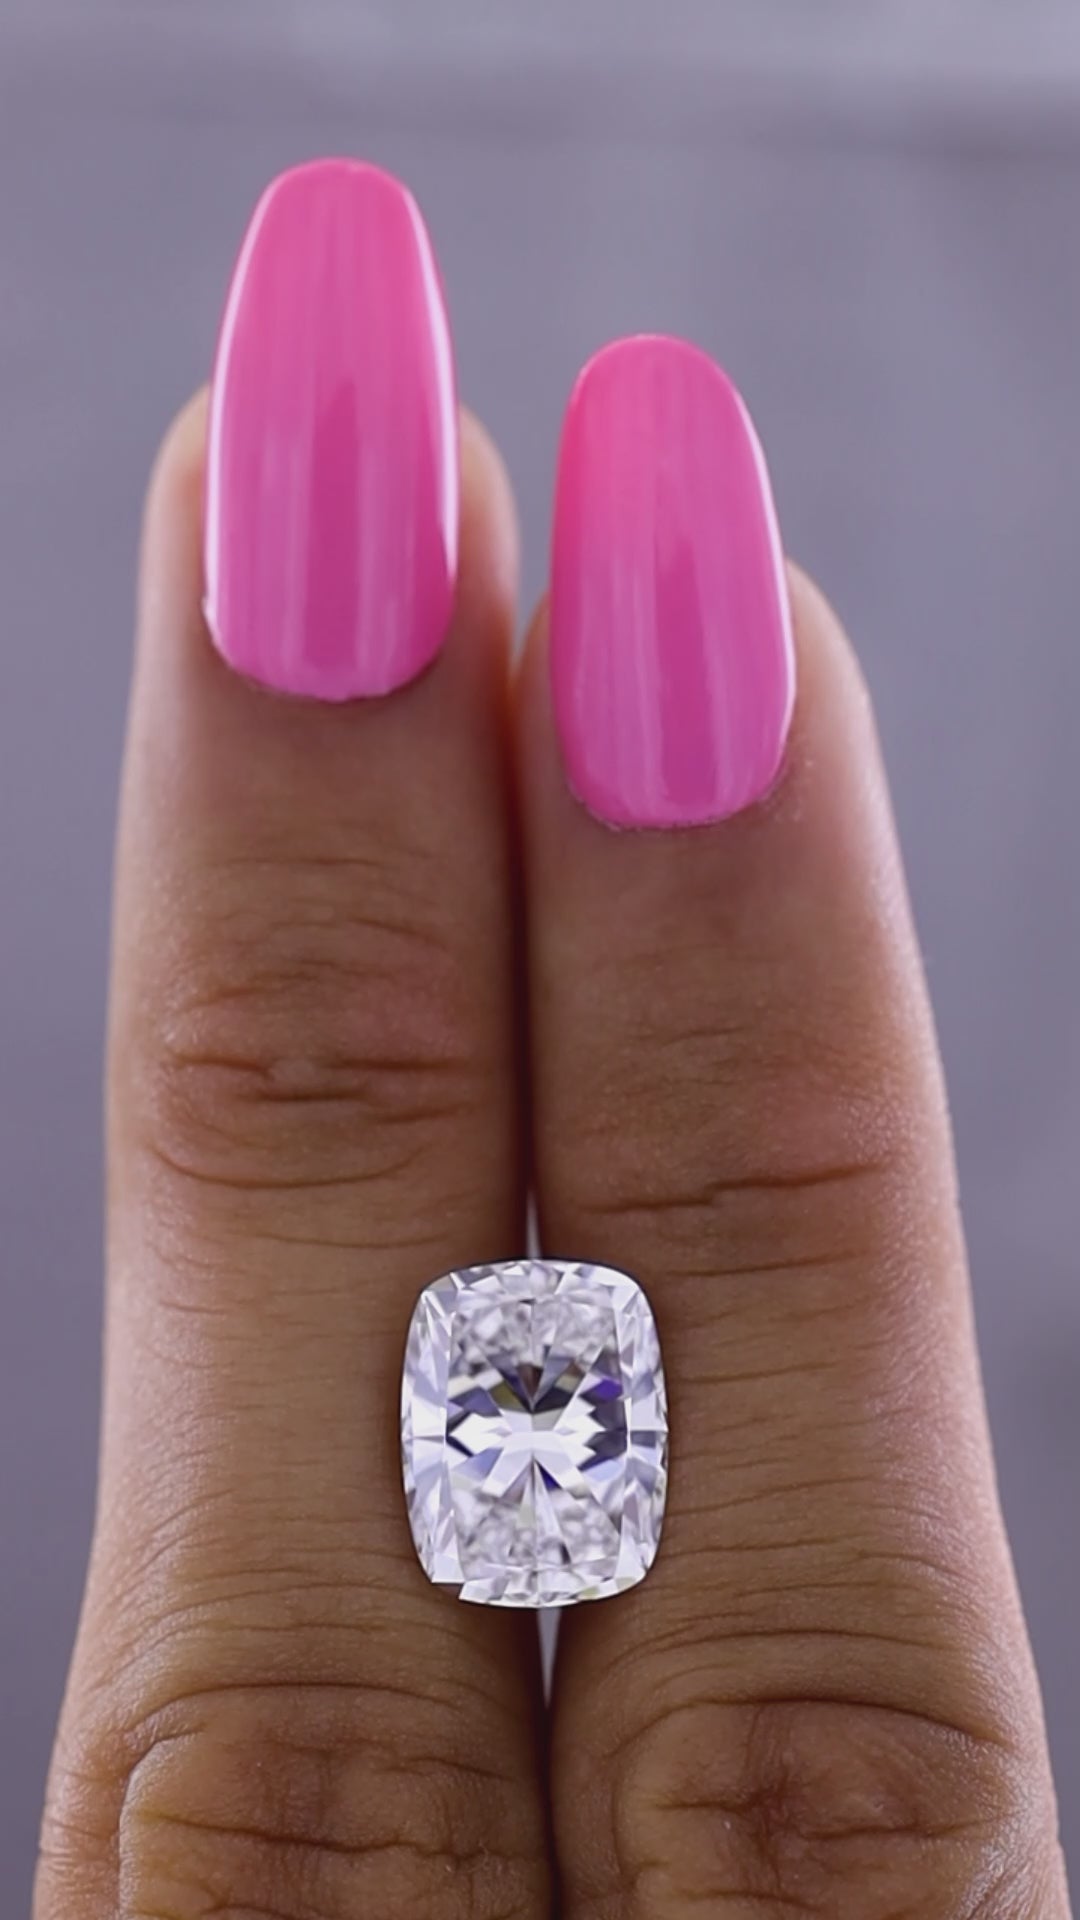 Flawless 6.01-Carat Cushion Diamond | Exceptional Investment in Geneva